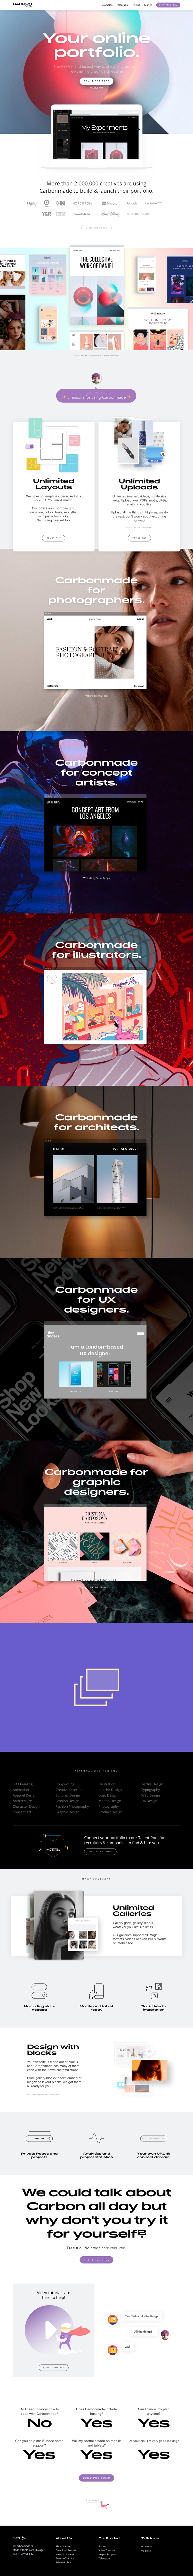 Carbonmade Landing Page Example: Carbonmade helps you show off your work and get discovered. Perfect for photographers, illustrators, motion designers, graphic designers, copywriters or anyone else who creates. NO coding needed, fully customizable layouts with everything included.